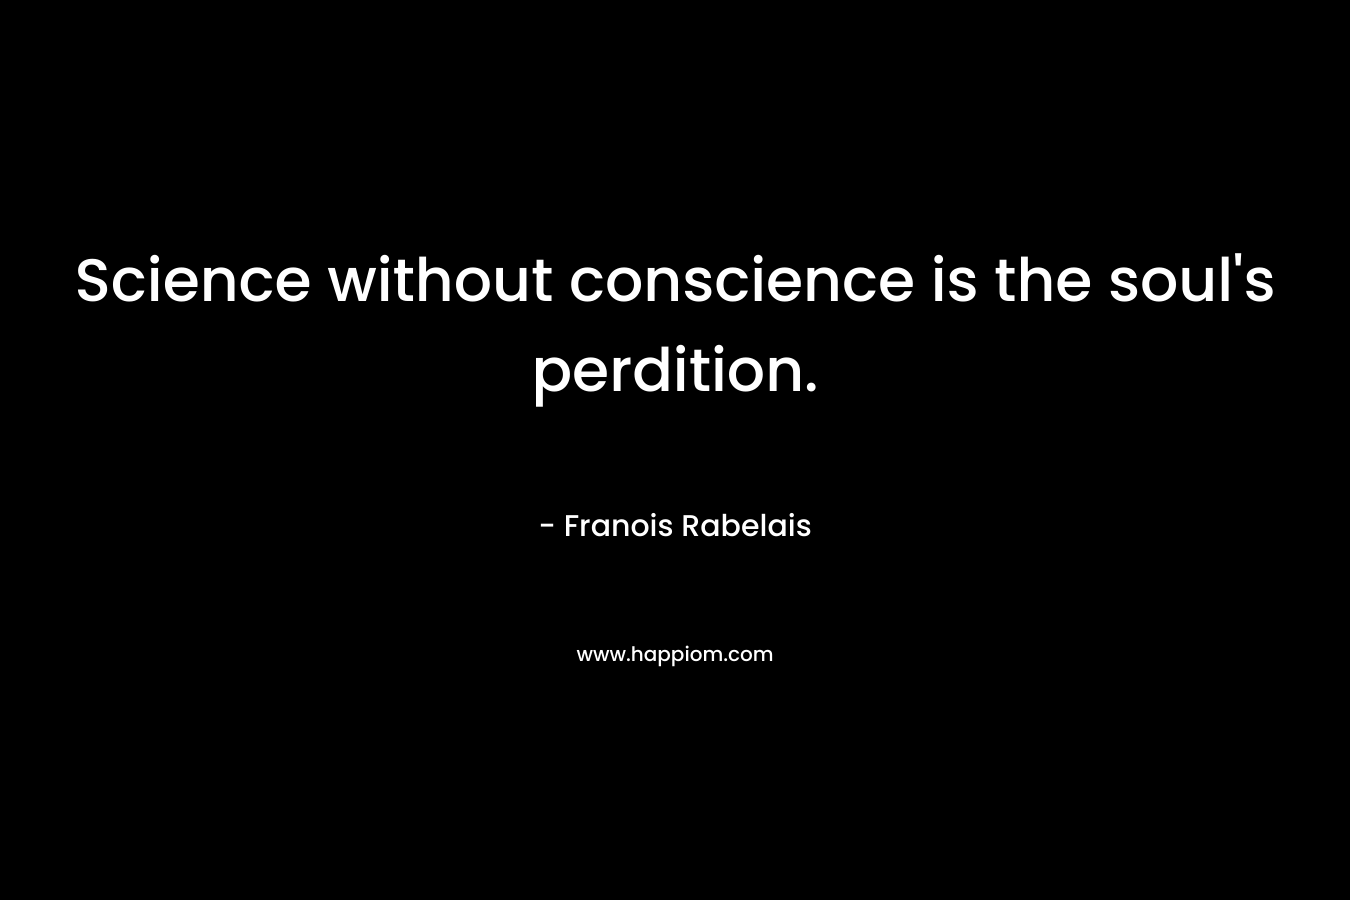 Science without conscience is the soul's perdition.